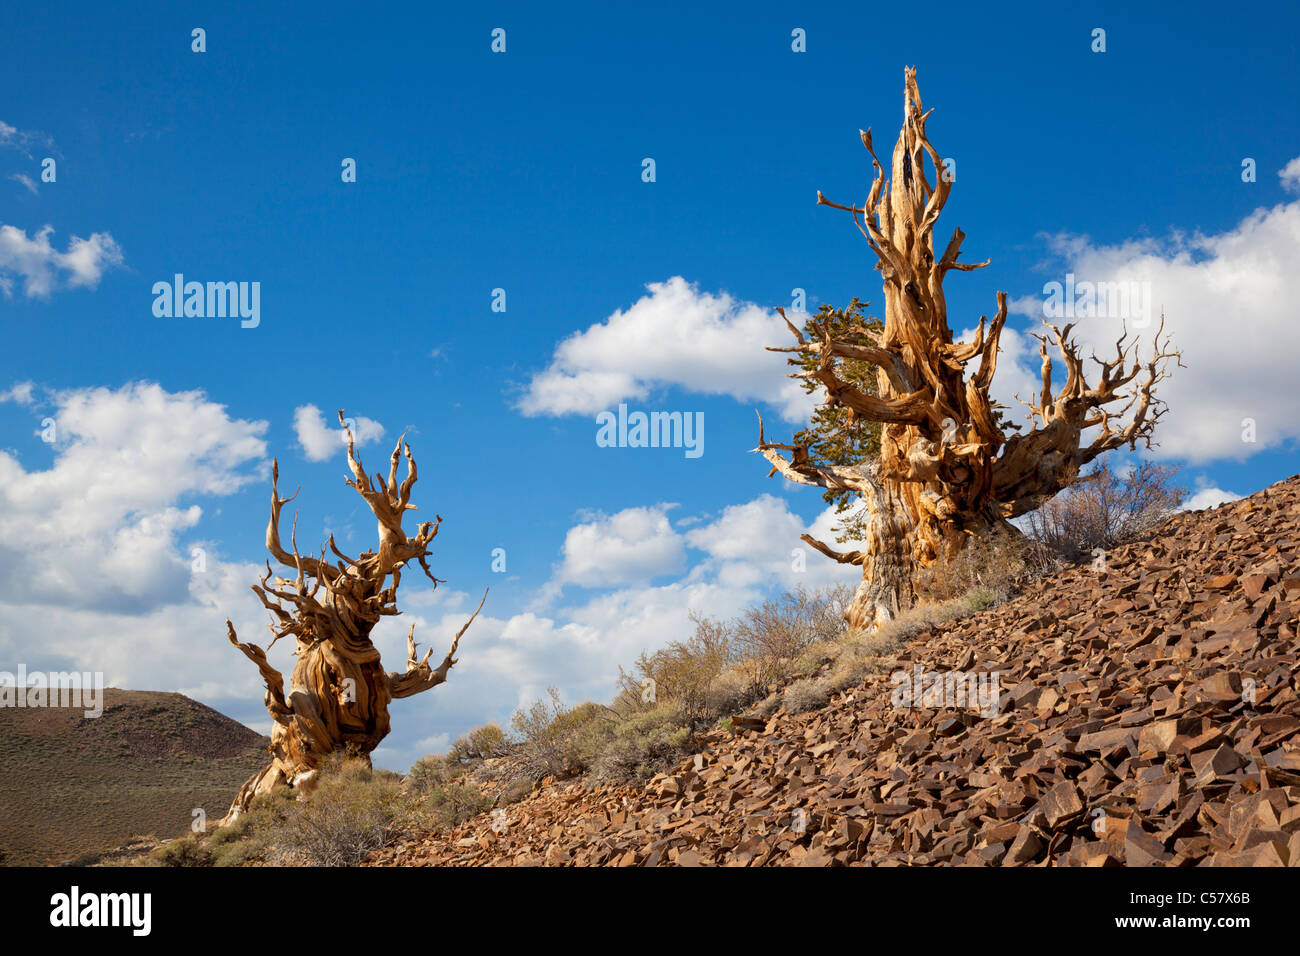 The Ancient bristlecone pine Forest Inyo national Forest Bishop California USA United States of America Stock Photo